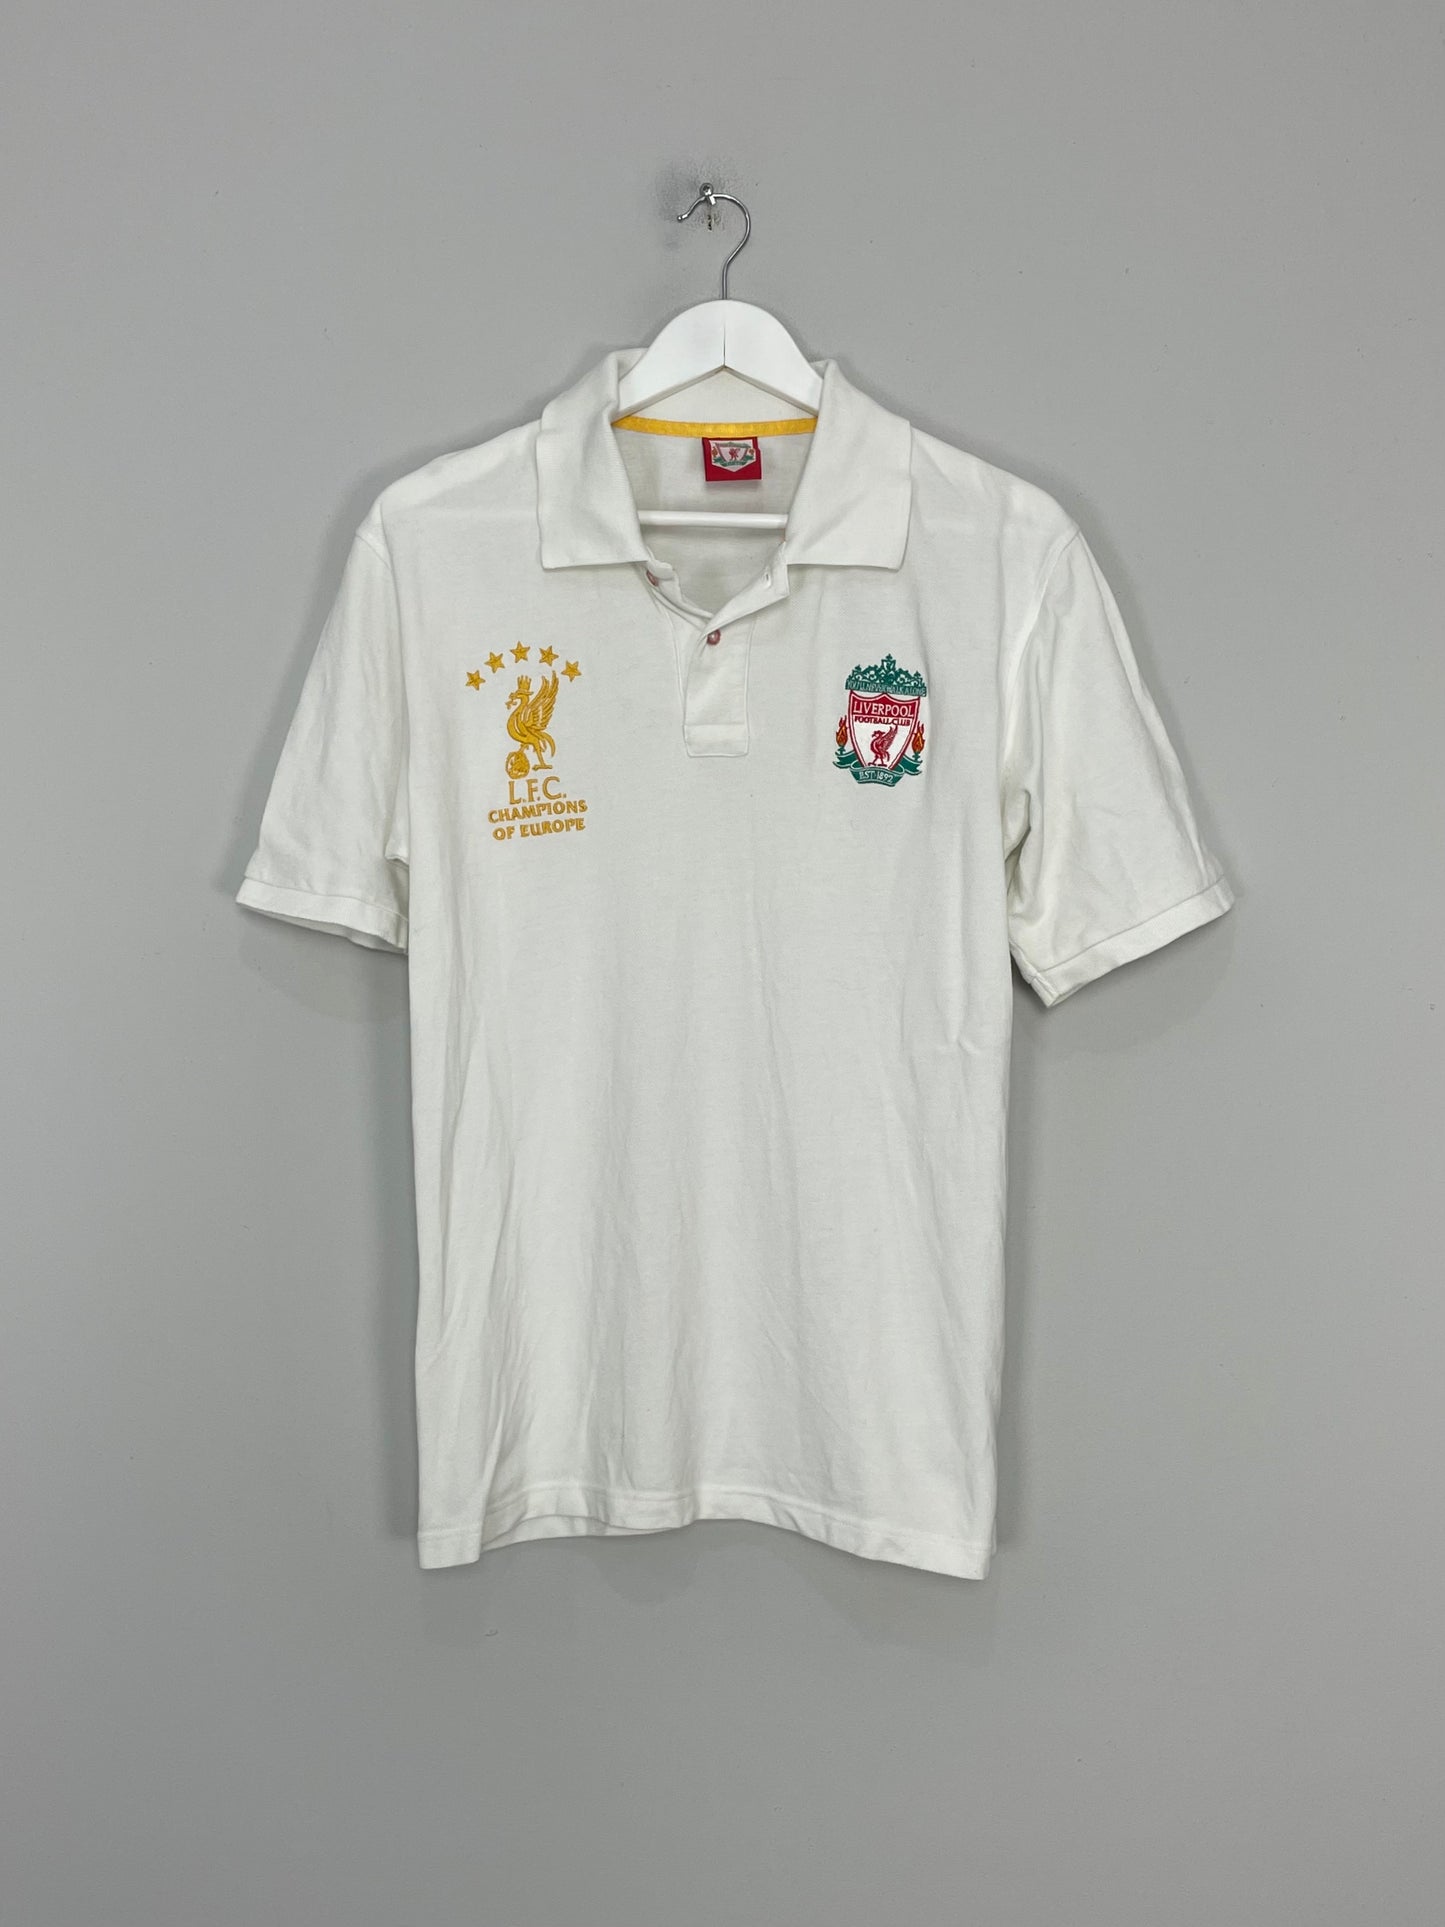 Image of the Liverpool shirt from the 2005/06 season